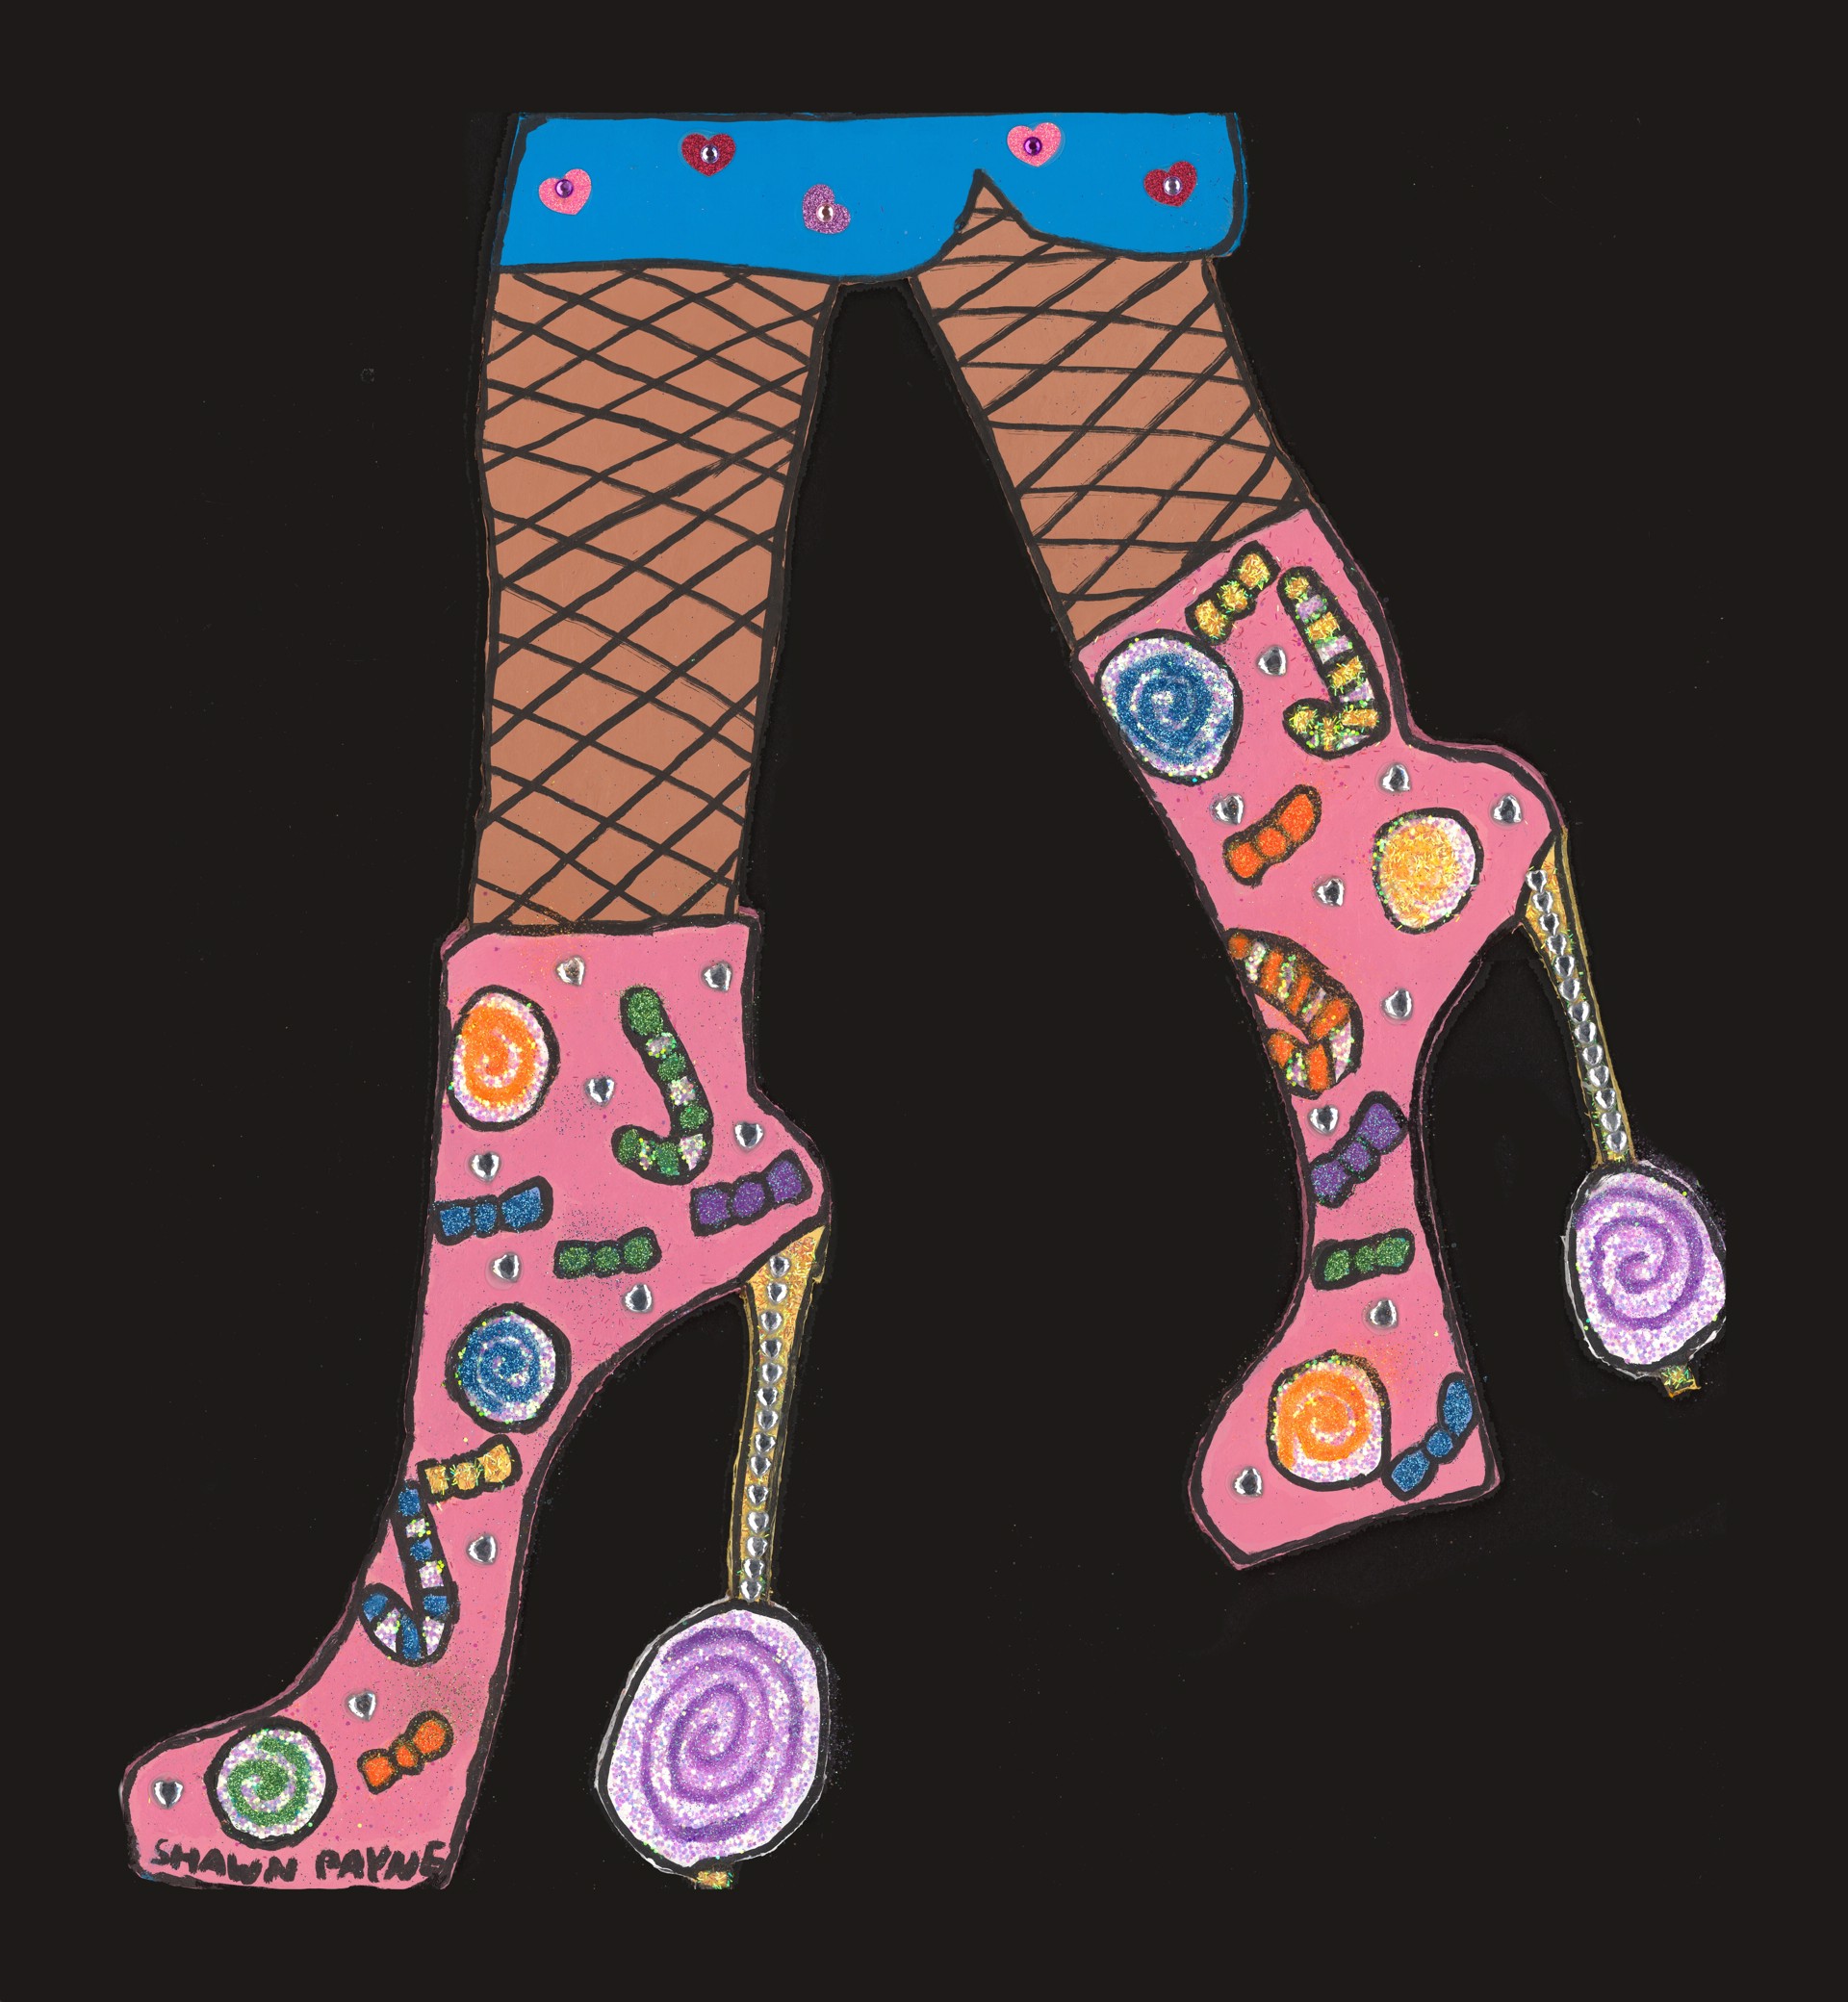 Candy Boots by Shawn Payne